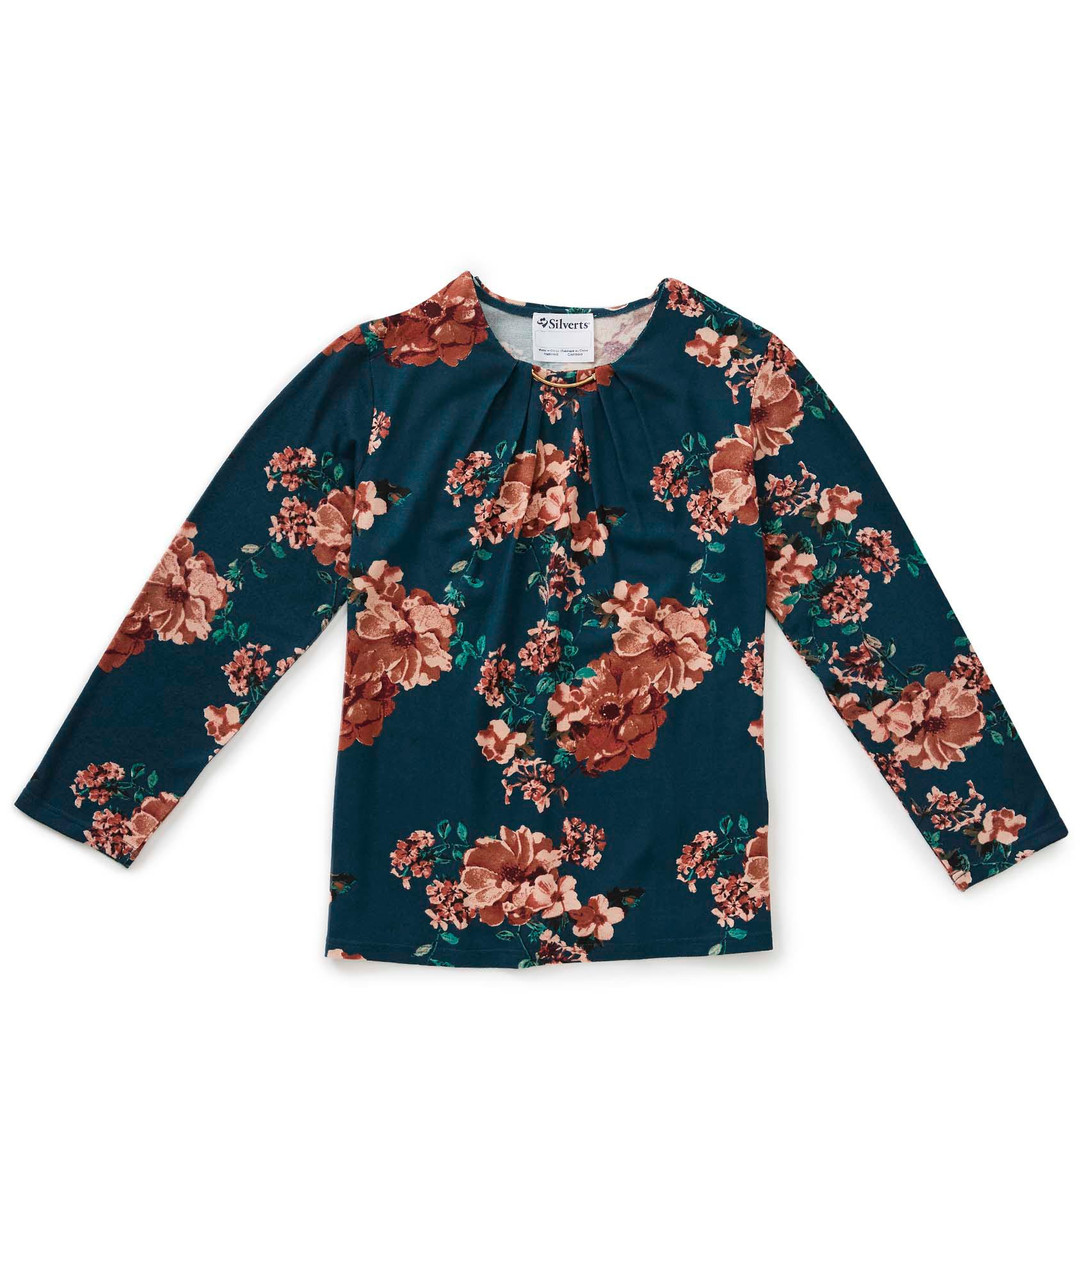 Silverts SV22130 Womens Long Sleeves Adaptive Open Back Sweater Knit Top Teal Flower, Size=2XL, SV22130-SV1405-2XL